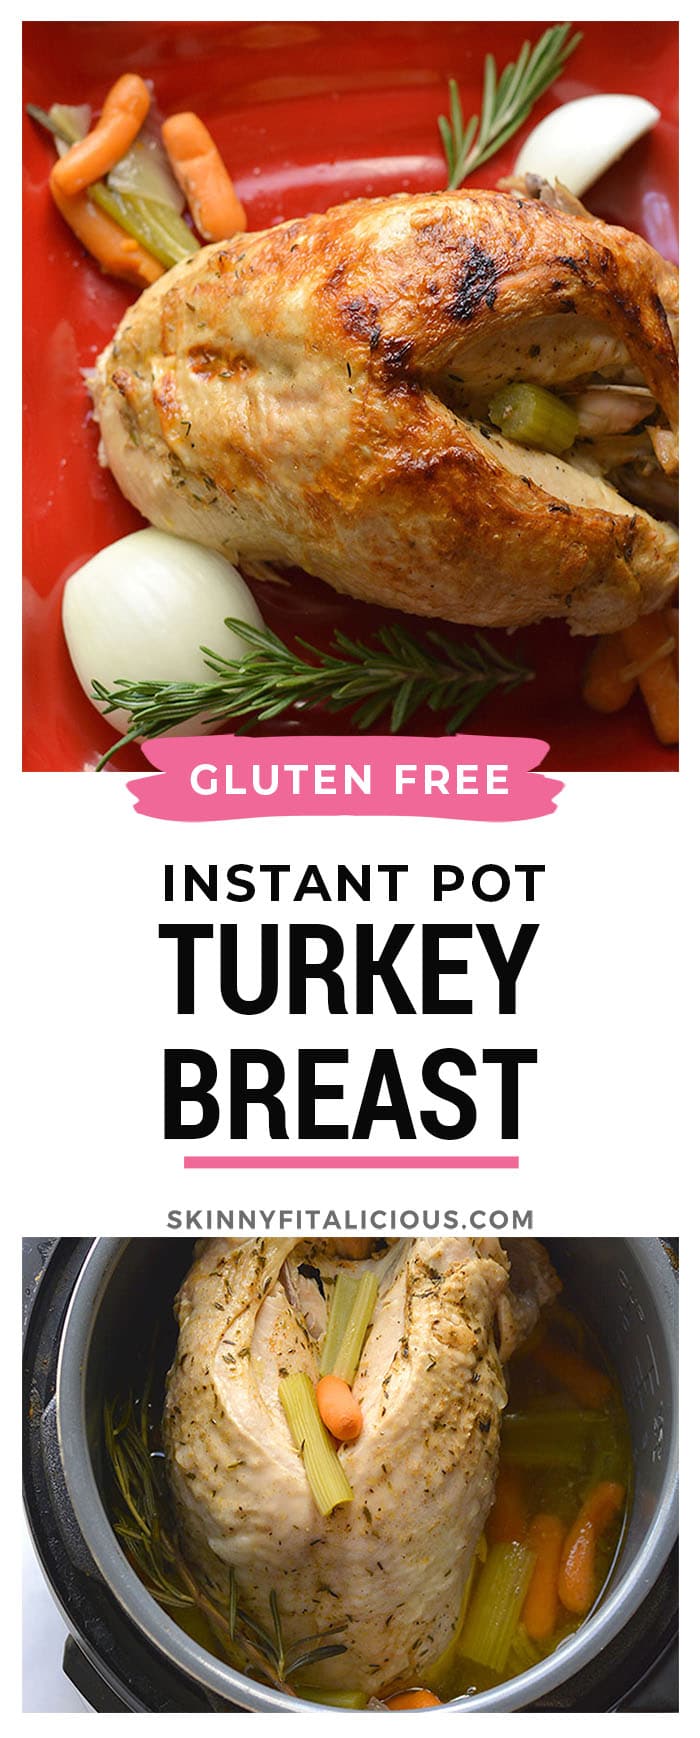 Instant Pot Turkey Breast! Yes you CAN make a delicious turkey breast in your instant pot in under 35 minutes. No more spending hours baking a turkey in an oven. This method is easy and makes the turkey super moist and tender. Whole30 + Paleo + Low Carb + Gluten Free + Low Calorie